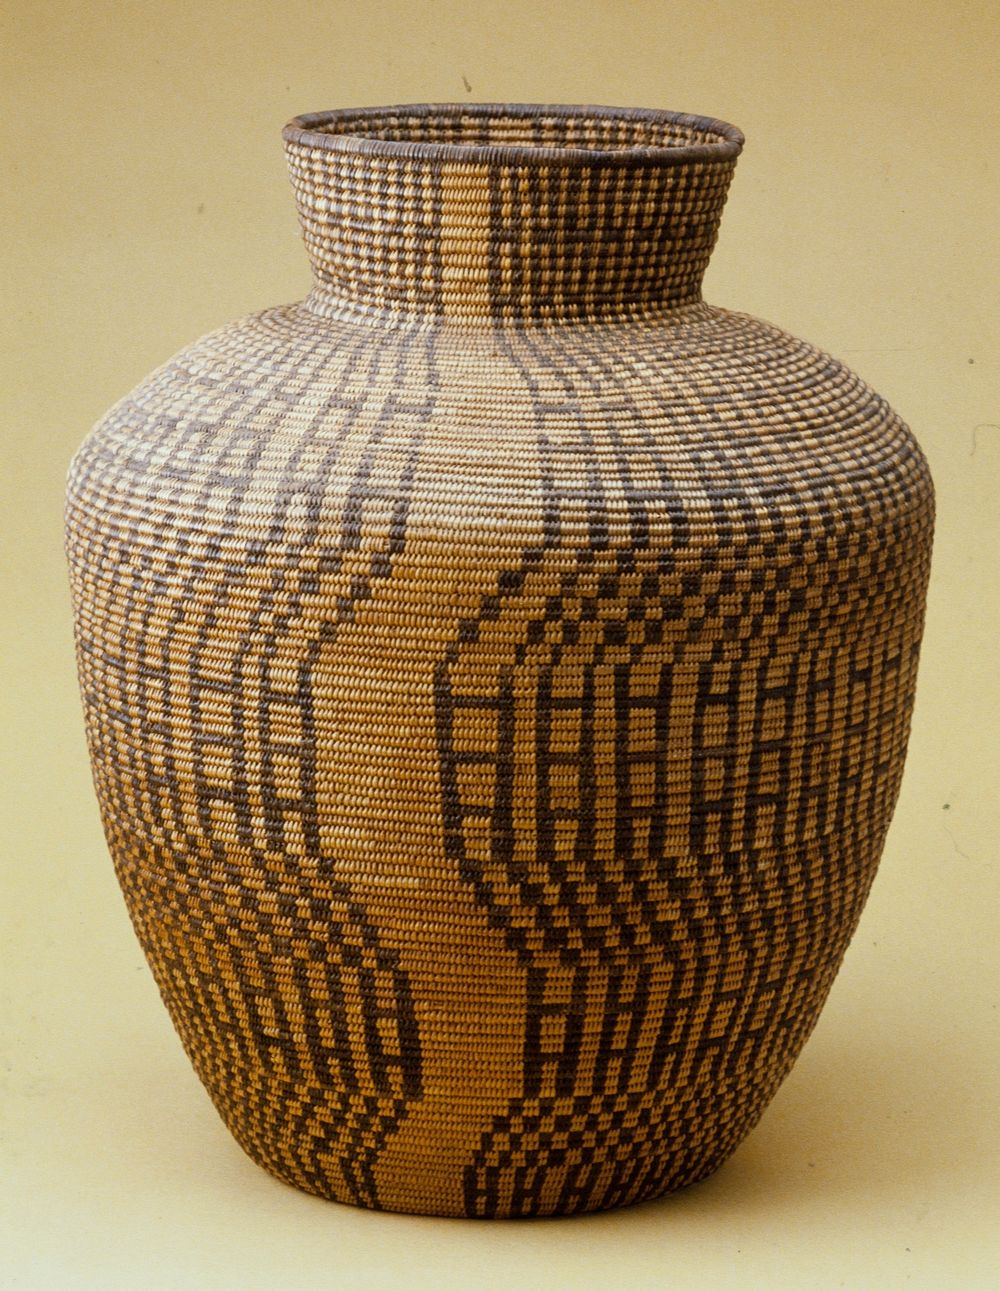 Olla form with geometric design. Original from the Minneapolis Institute of Art.